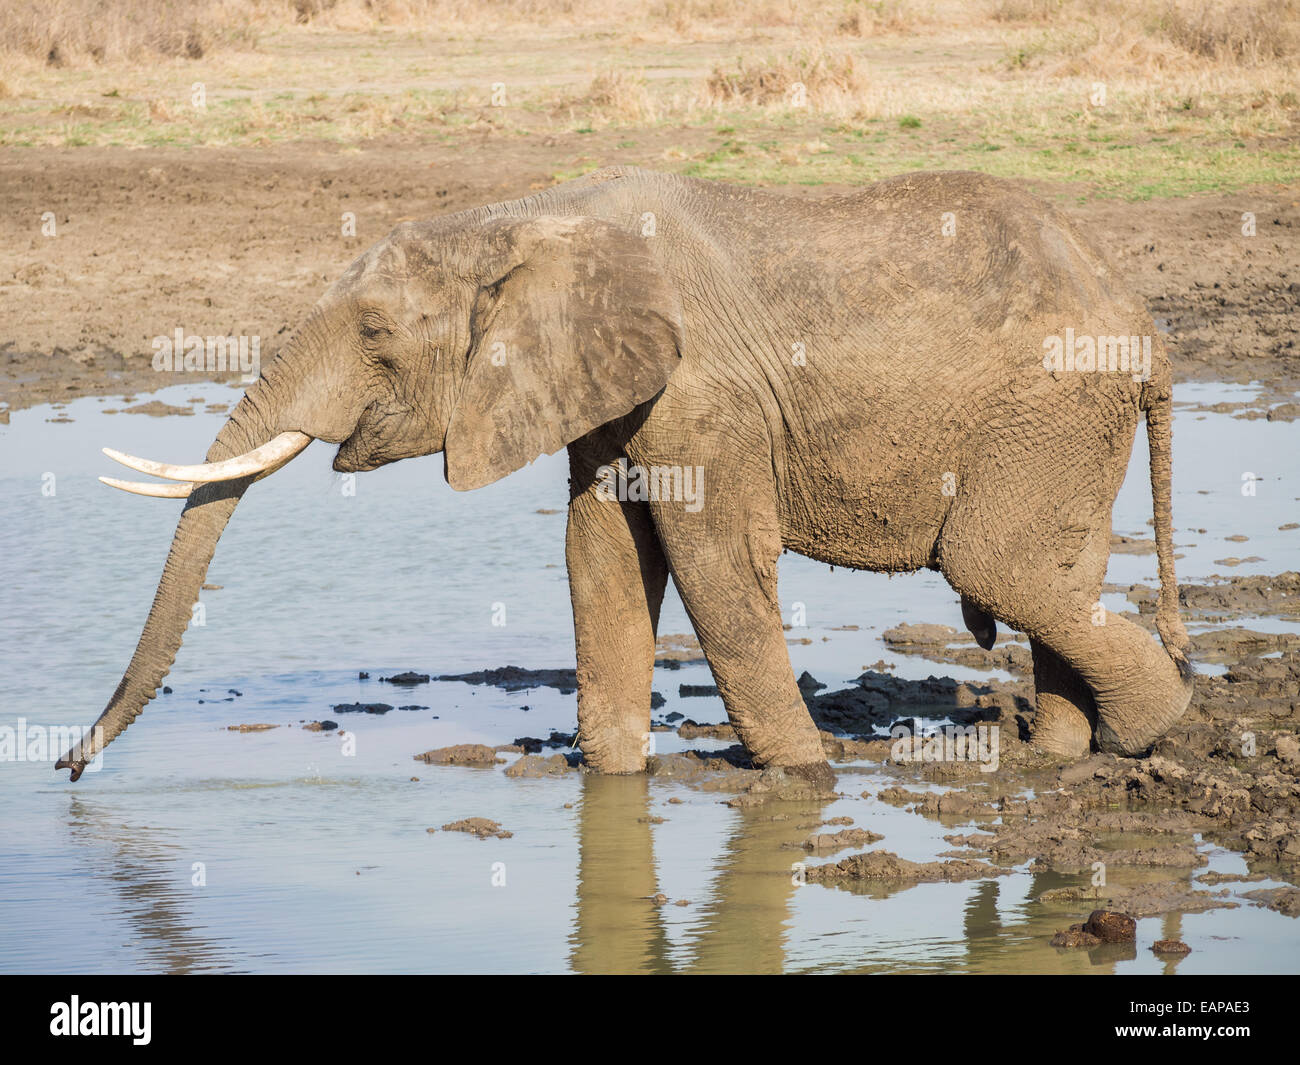 Horizontal photo of an adult male elephant with canines drinking water on the savanna in a national park in Tanzania, Africa. Stock Photo